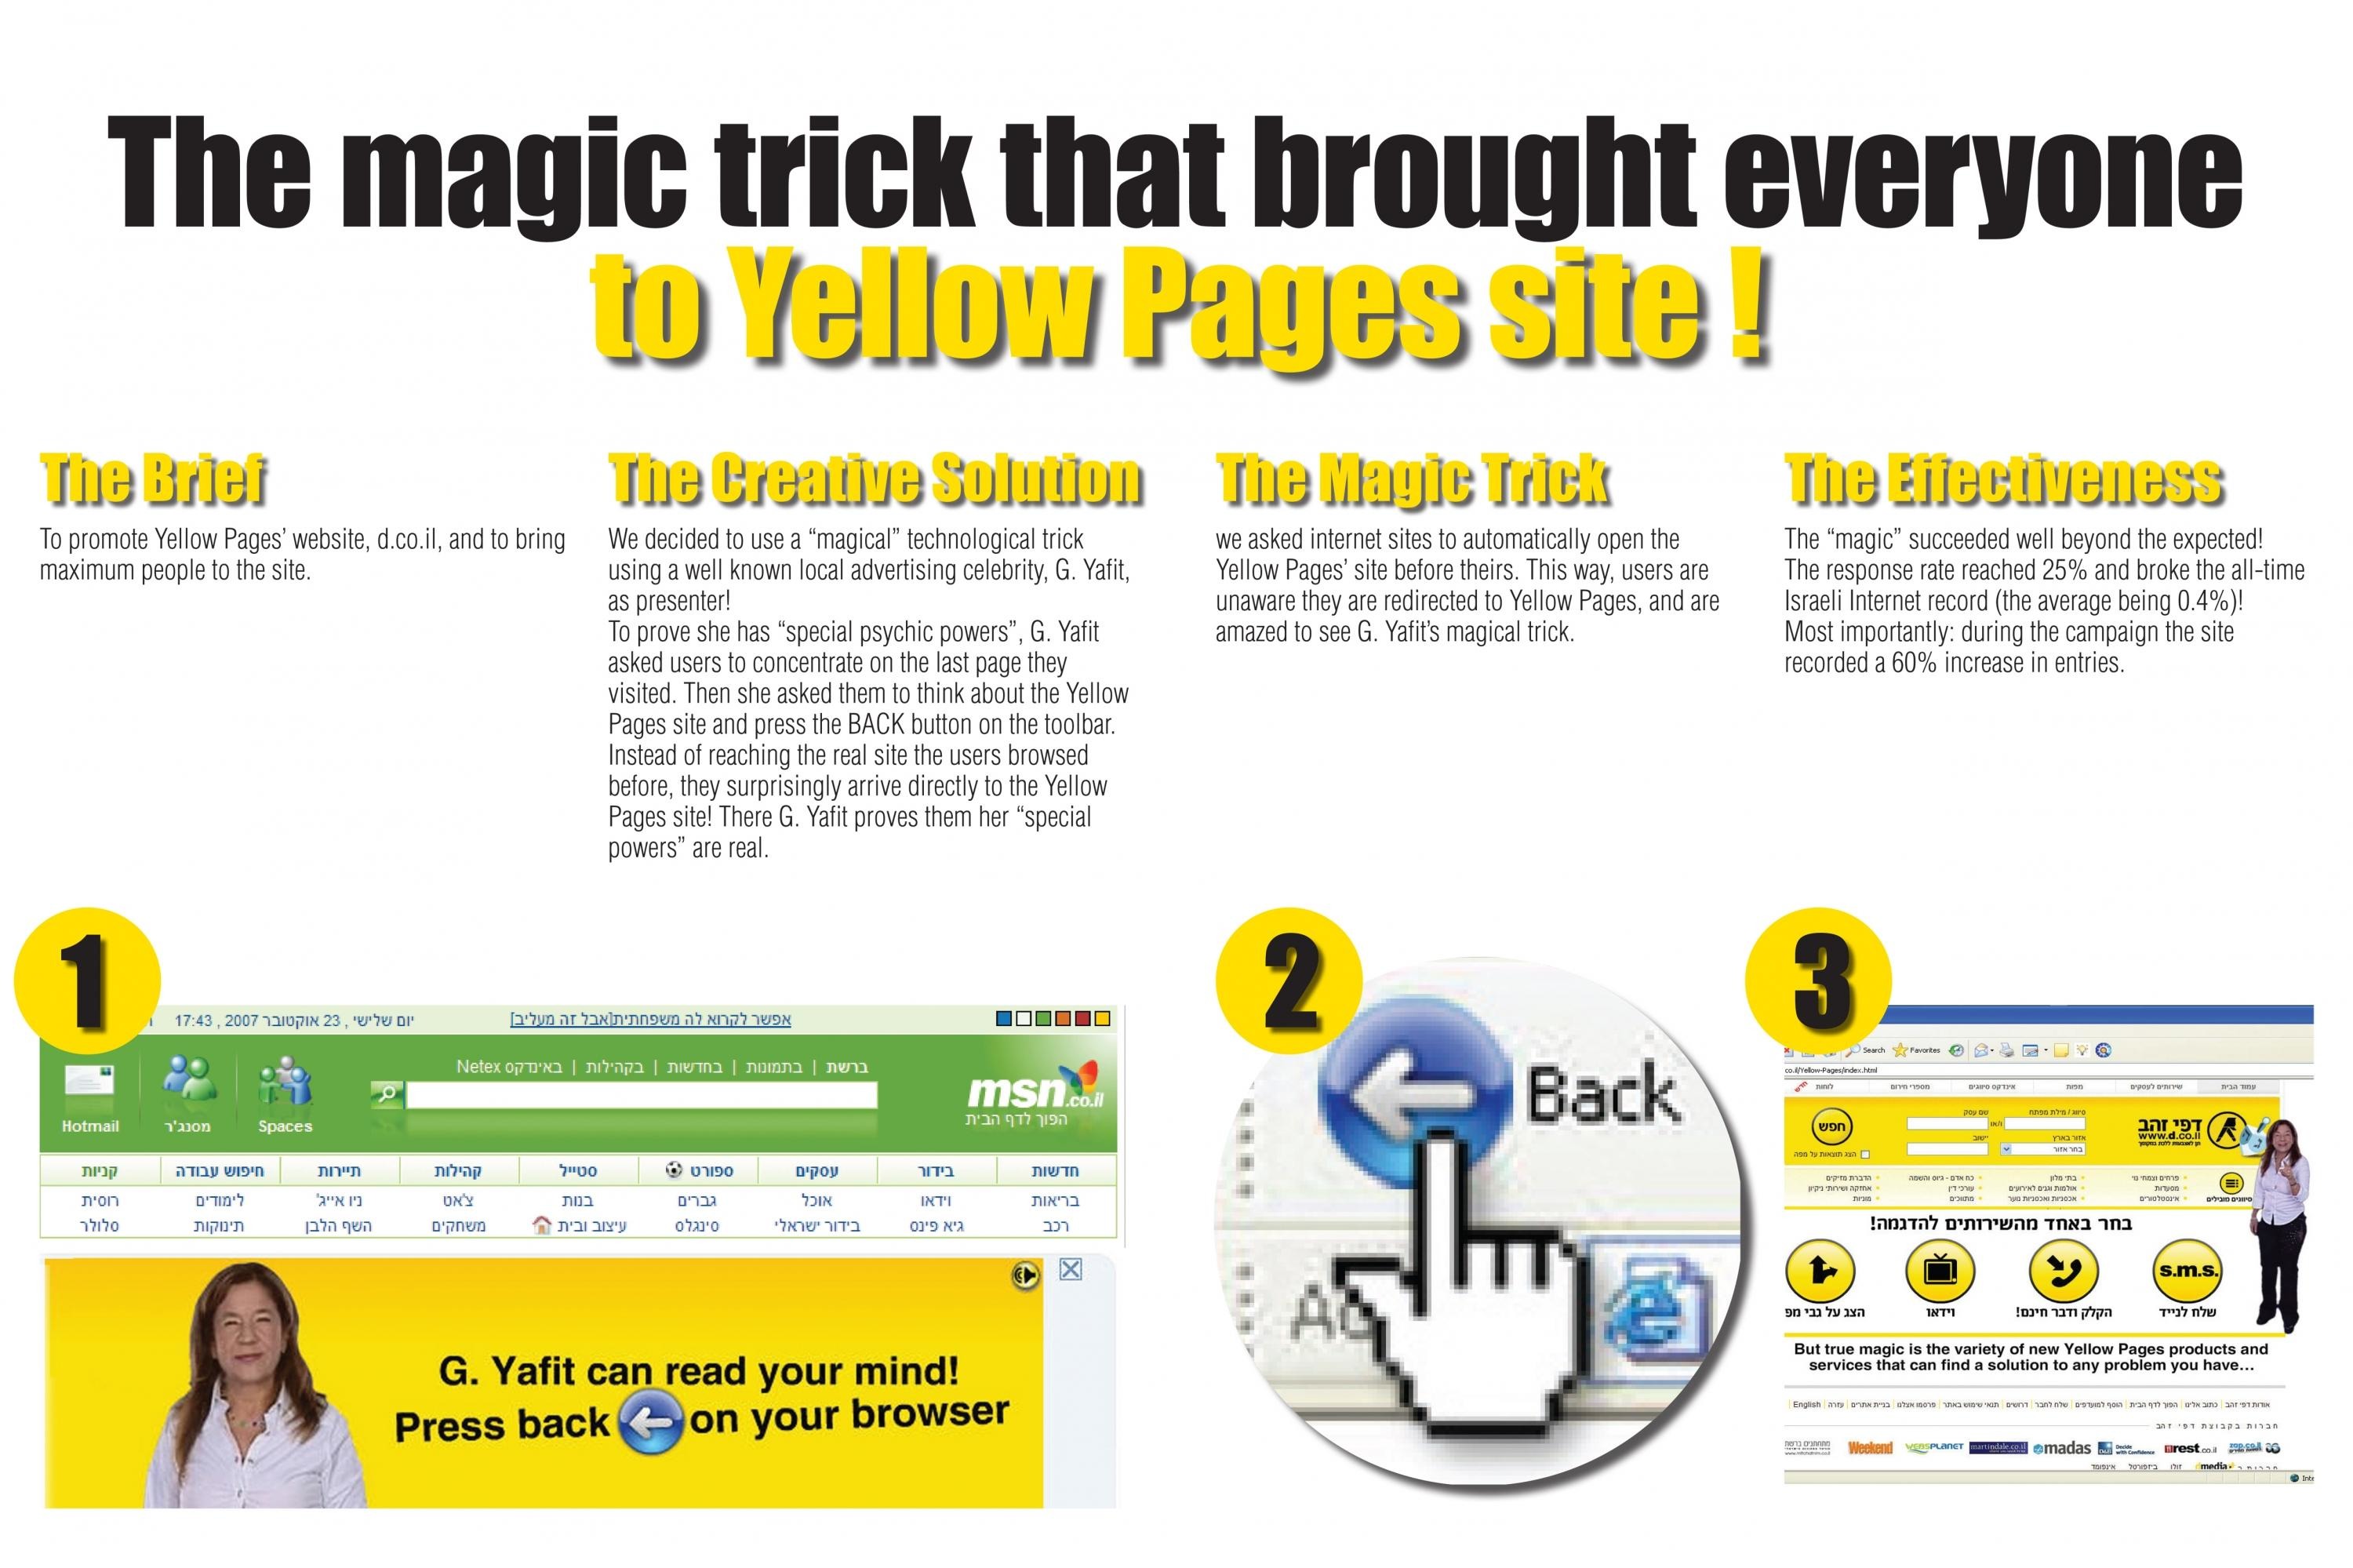 YELLOW PAGES SITE